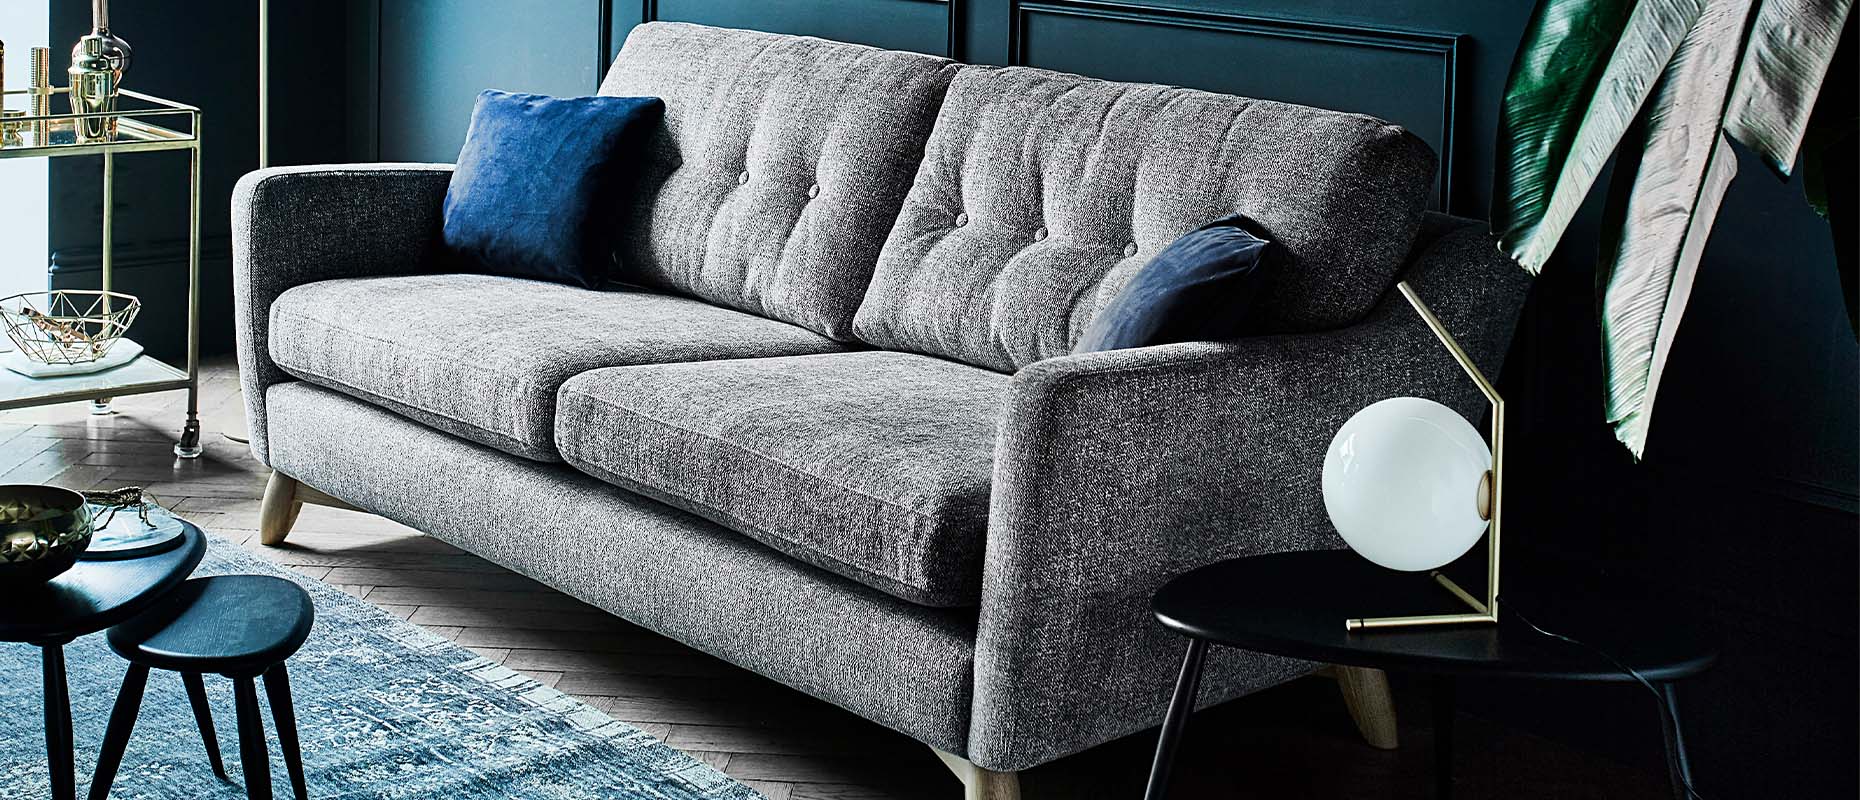 Cosenza sofa Collection from ercol at Forrest Furnishing